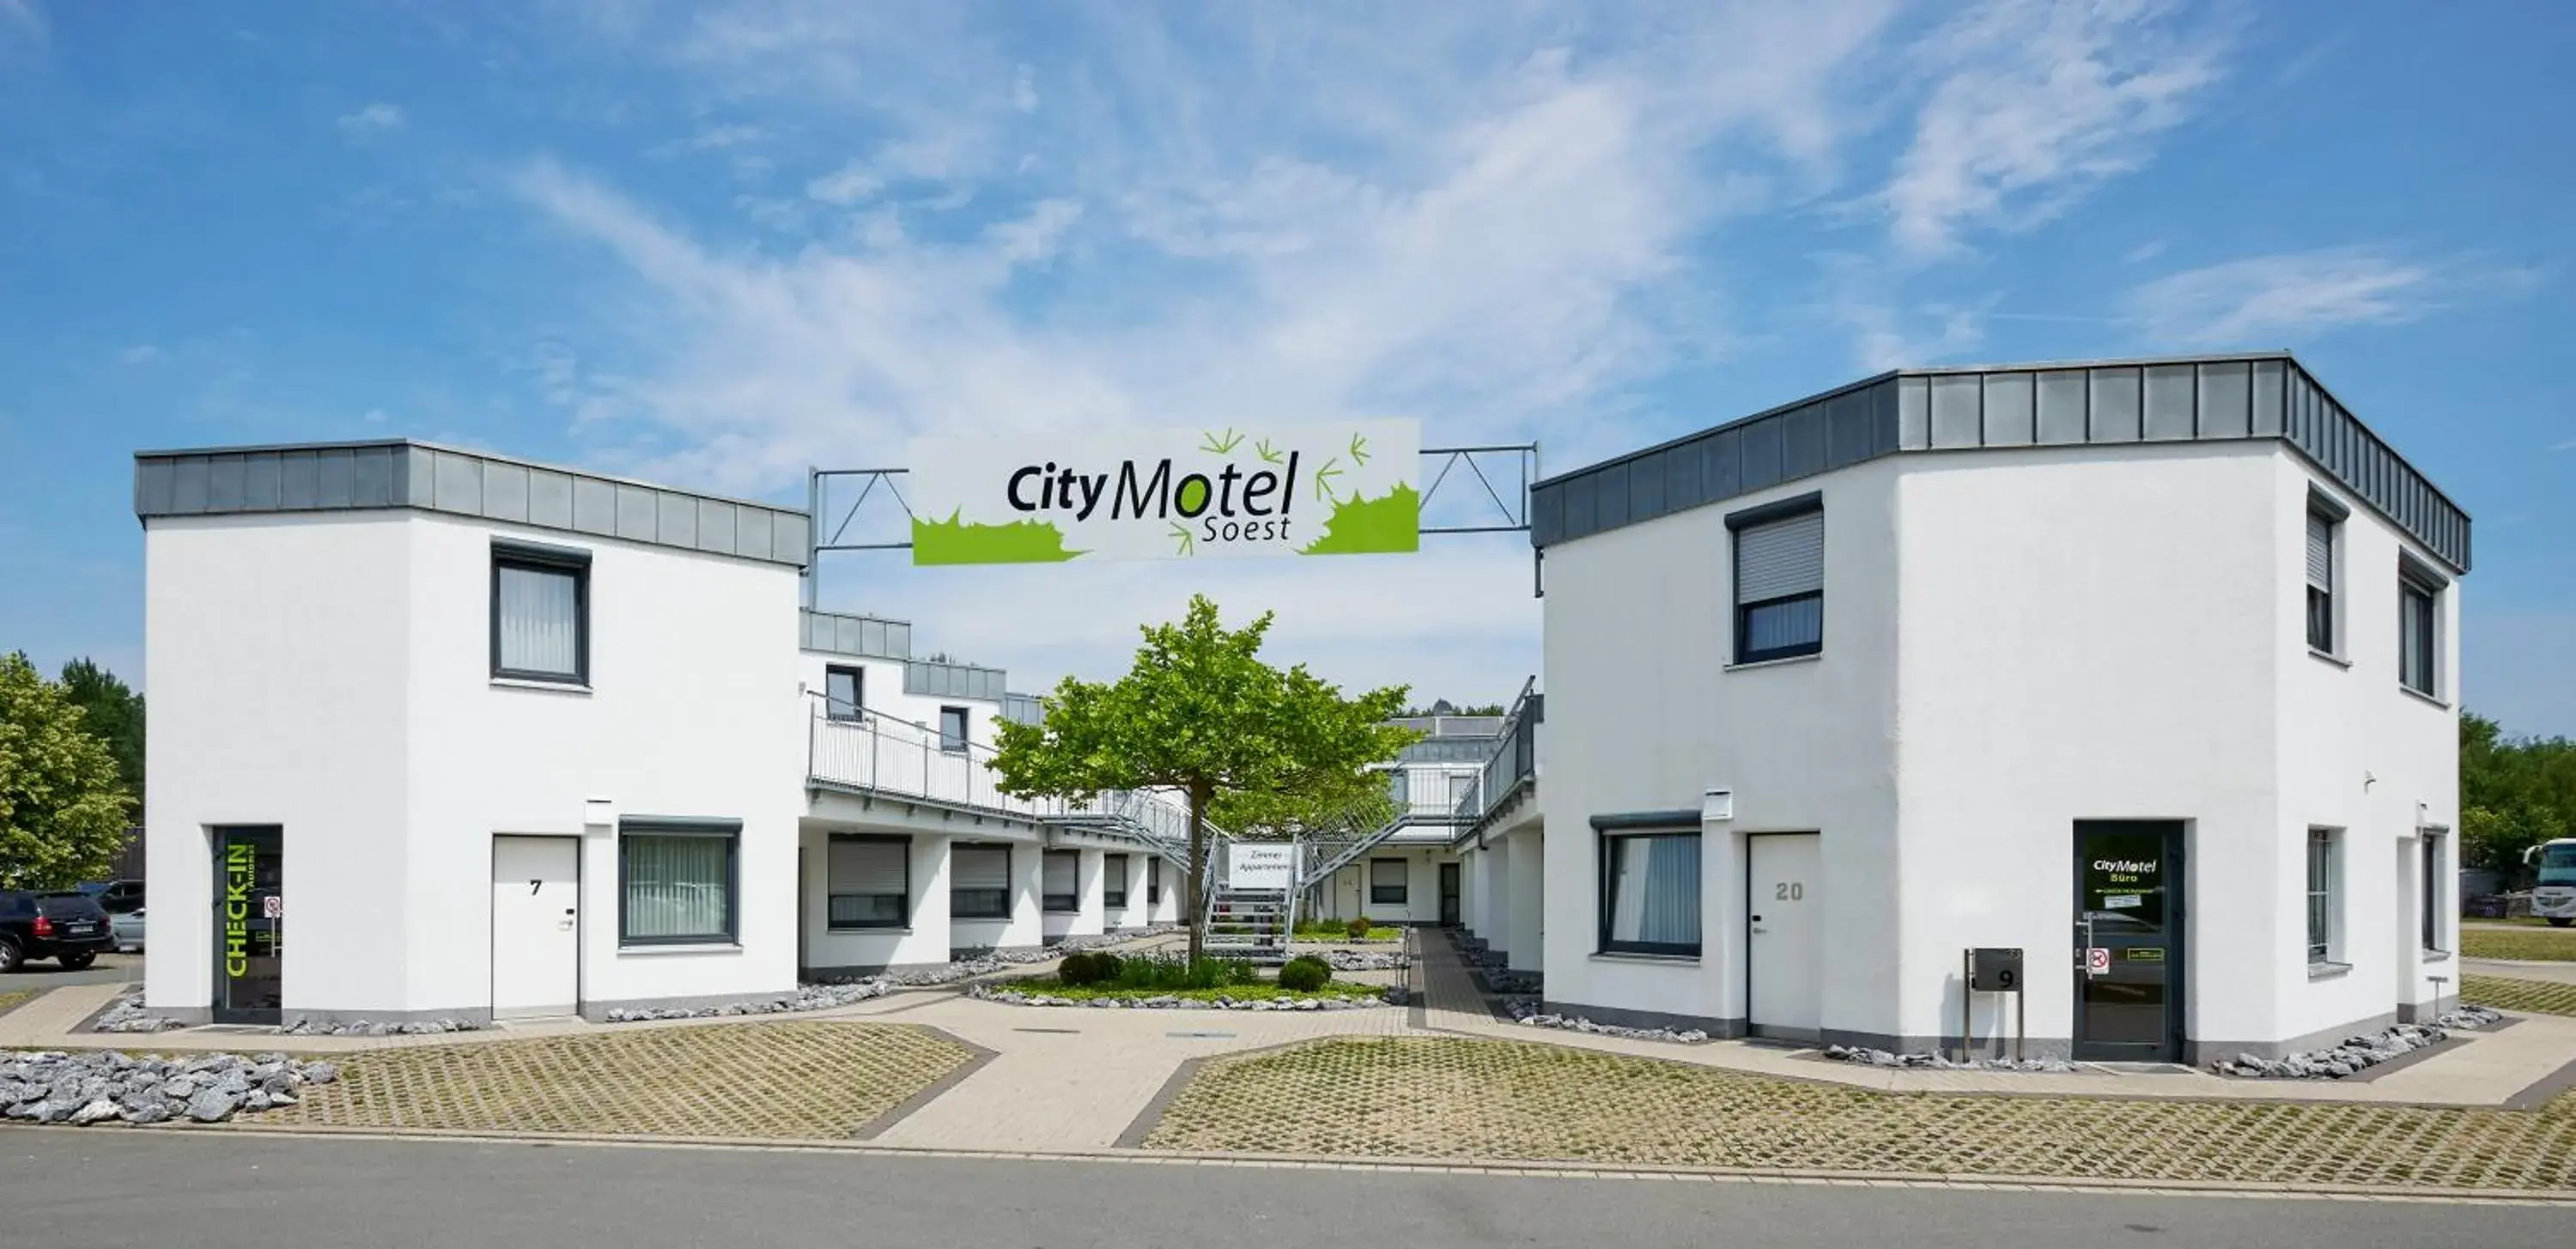 Property building in City Motel Soest